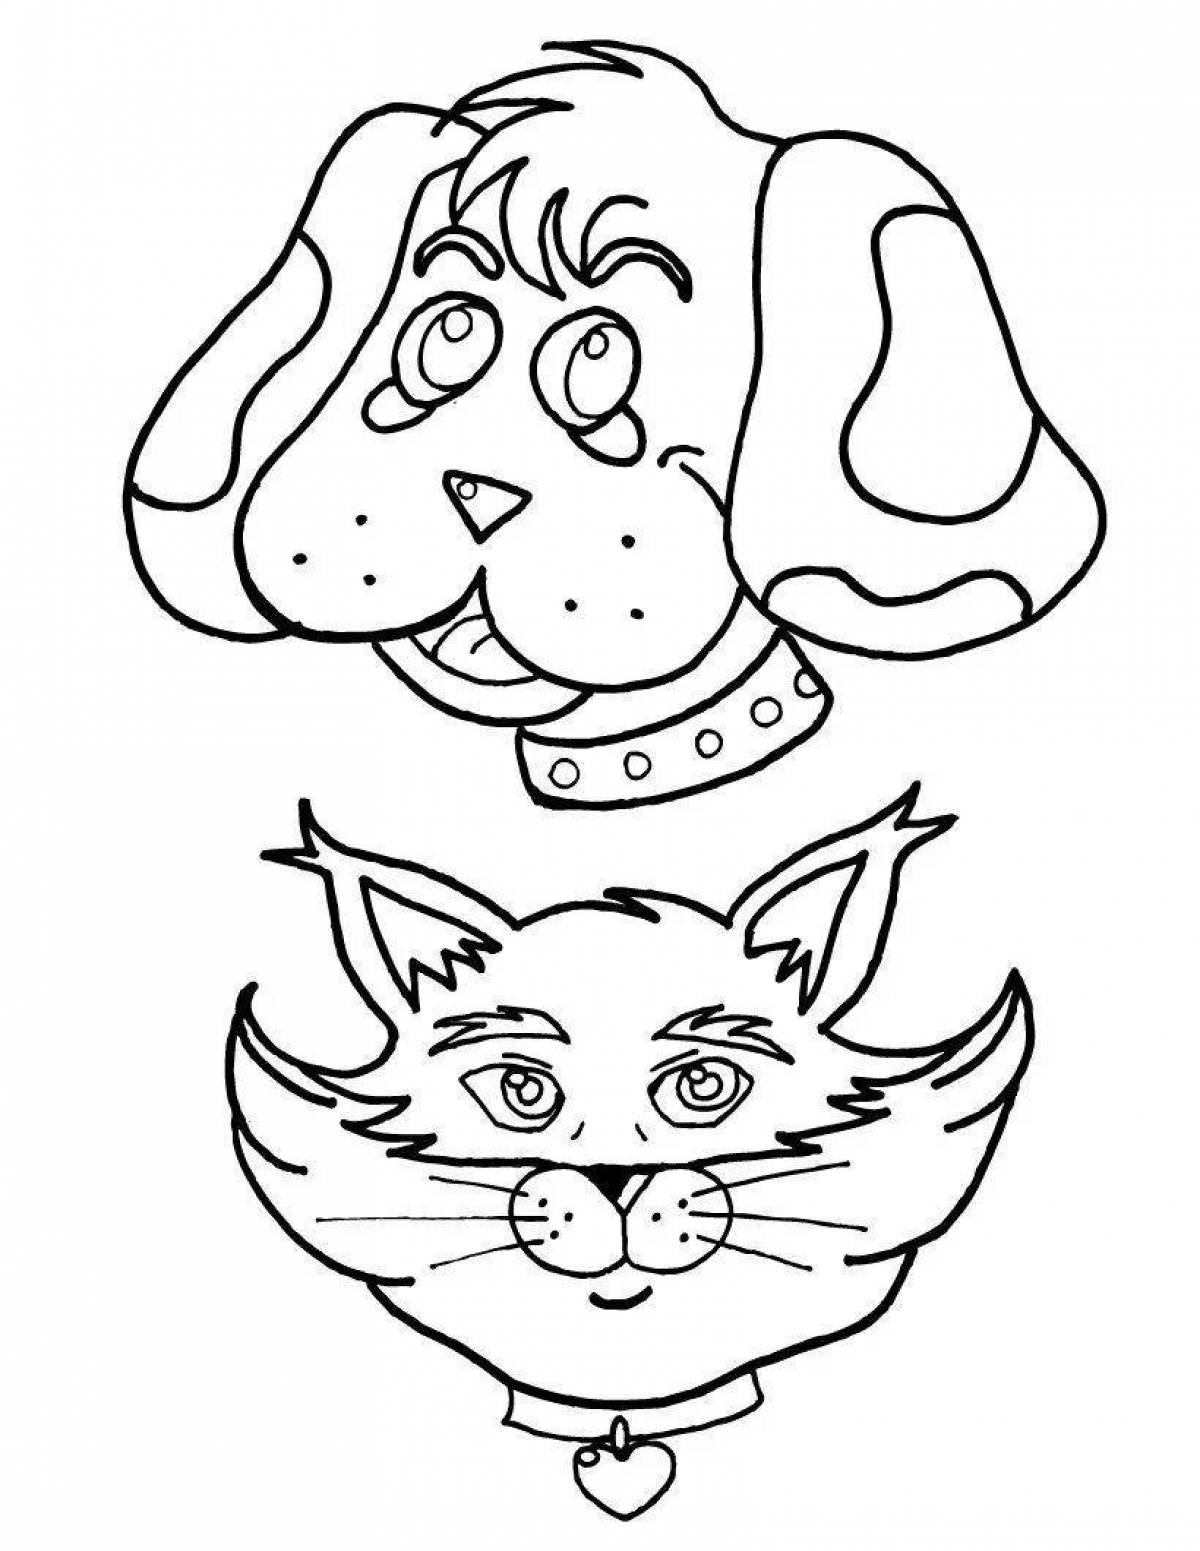 Coloring book playful cat and dog